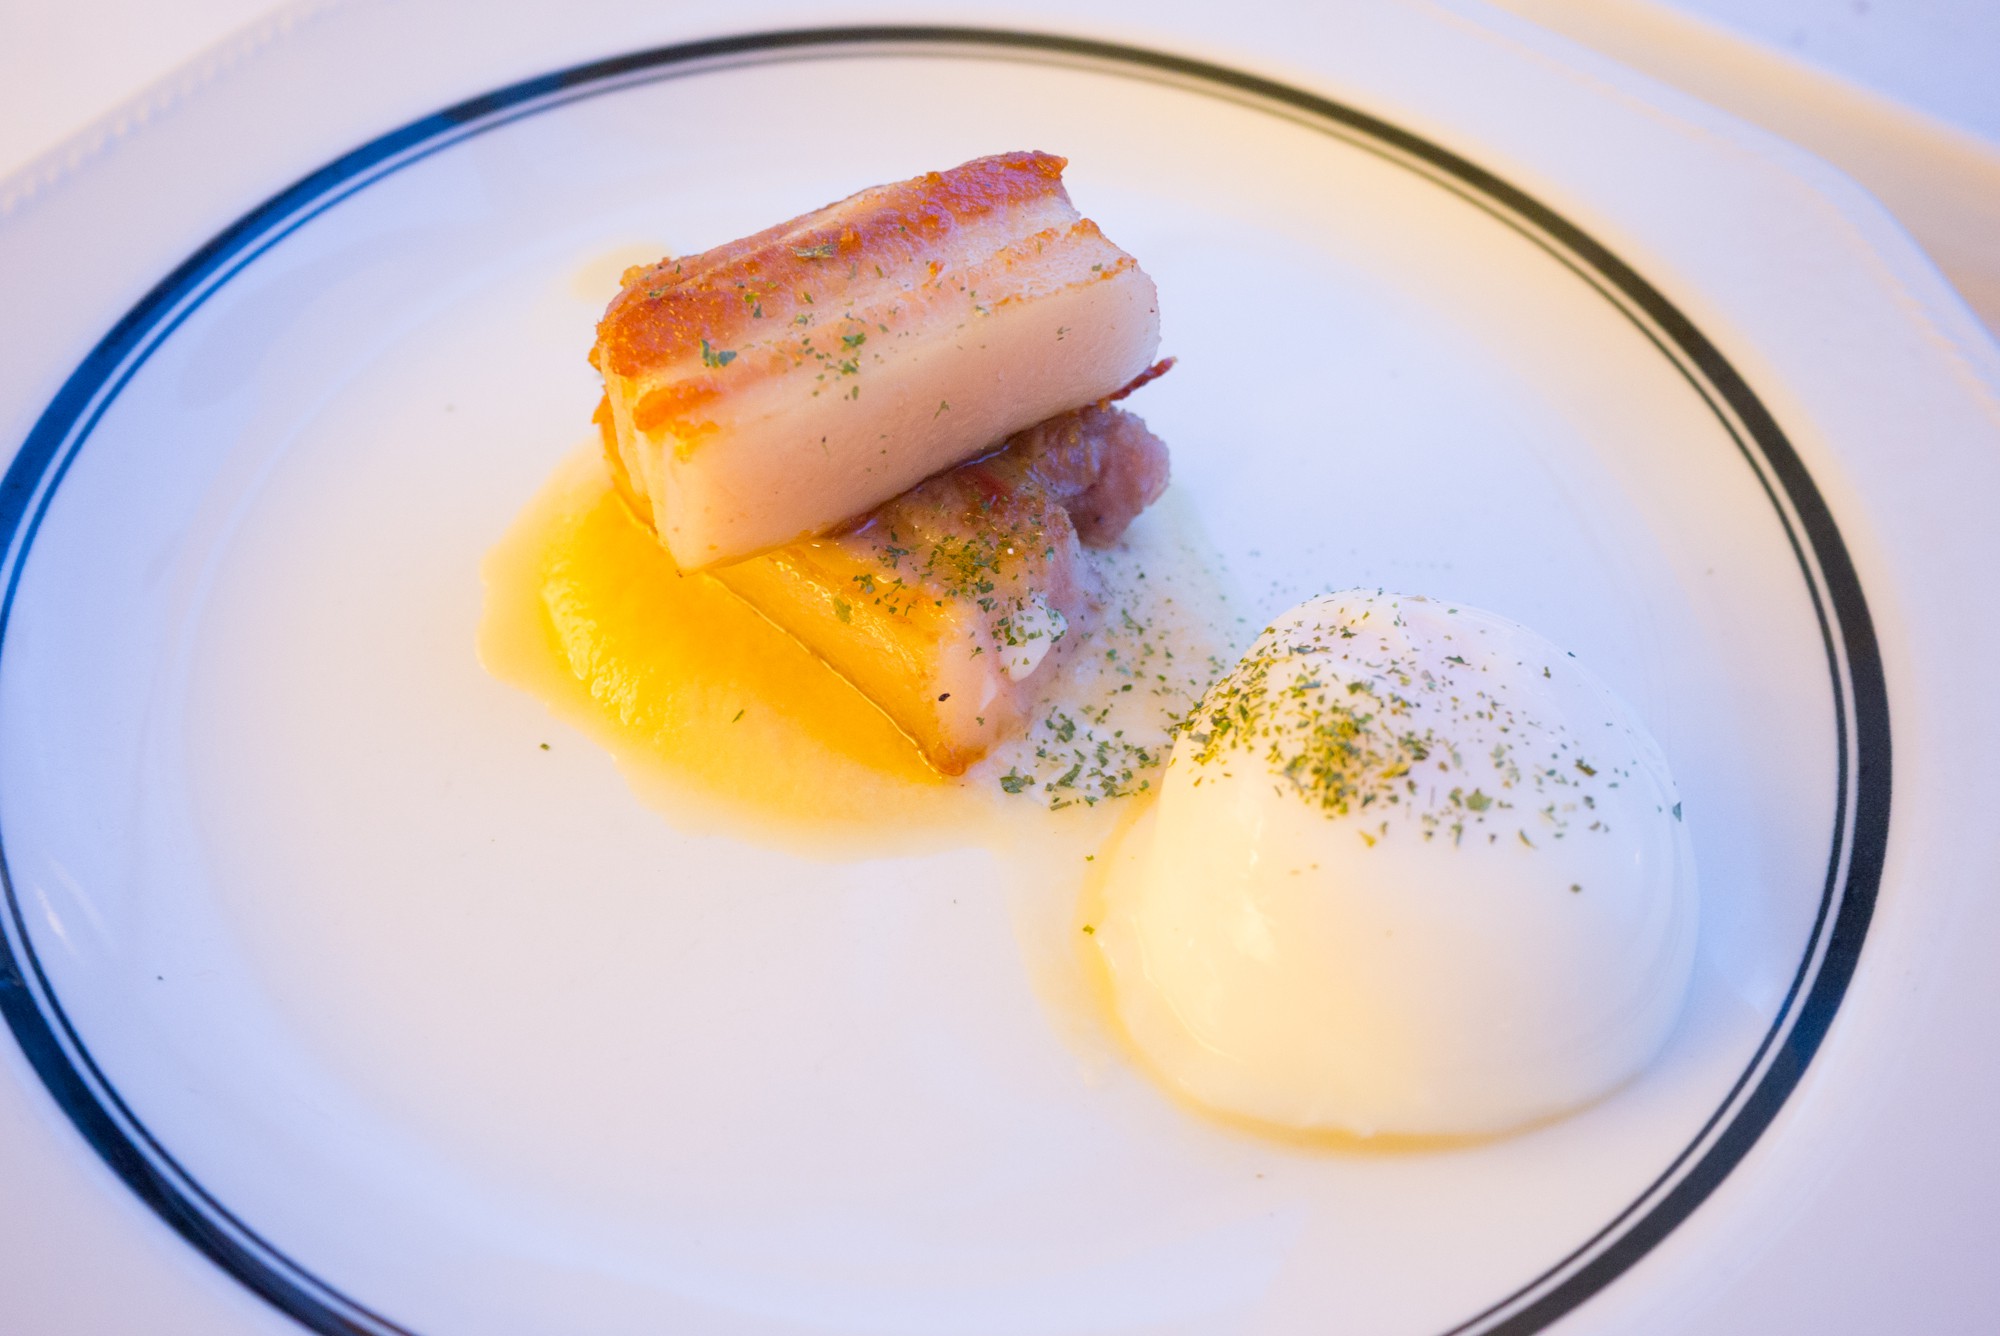 36h Pork Belly, Low-temp Egg and Apple+Pineapple Purée